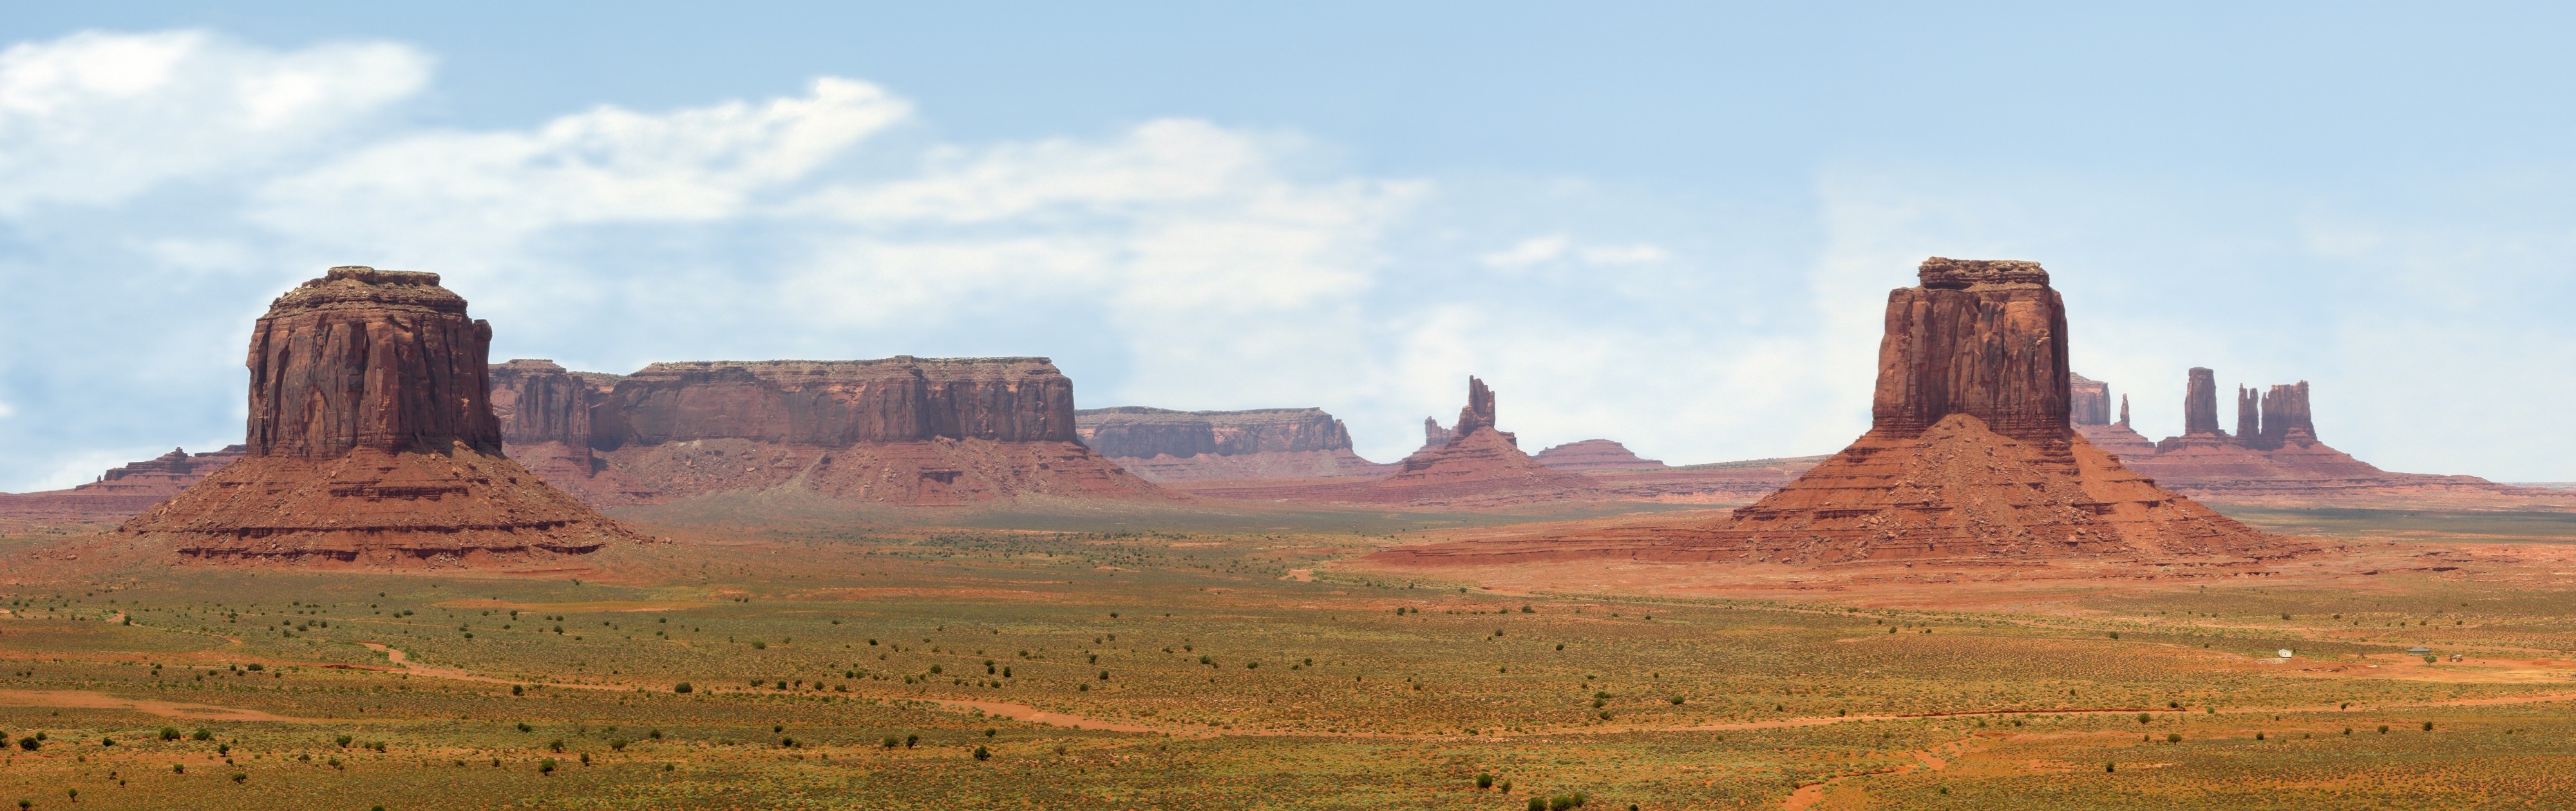 Artist Point-Monument Valley-USA-retouched